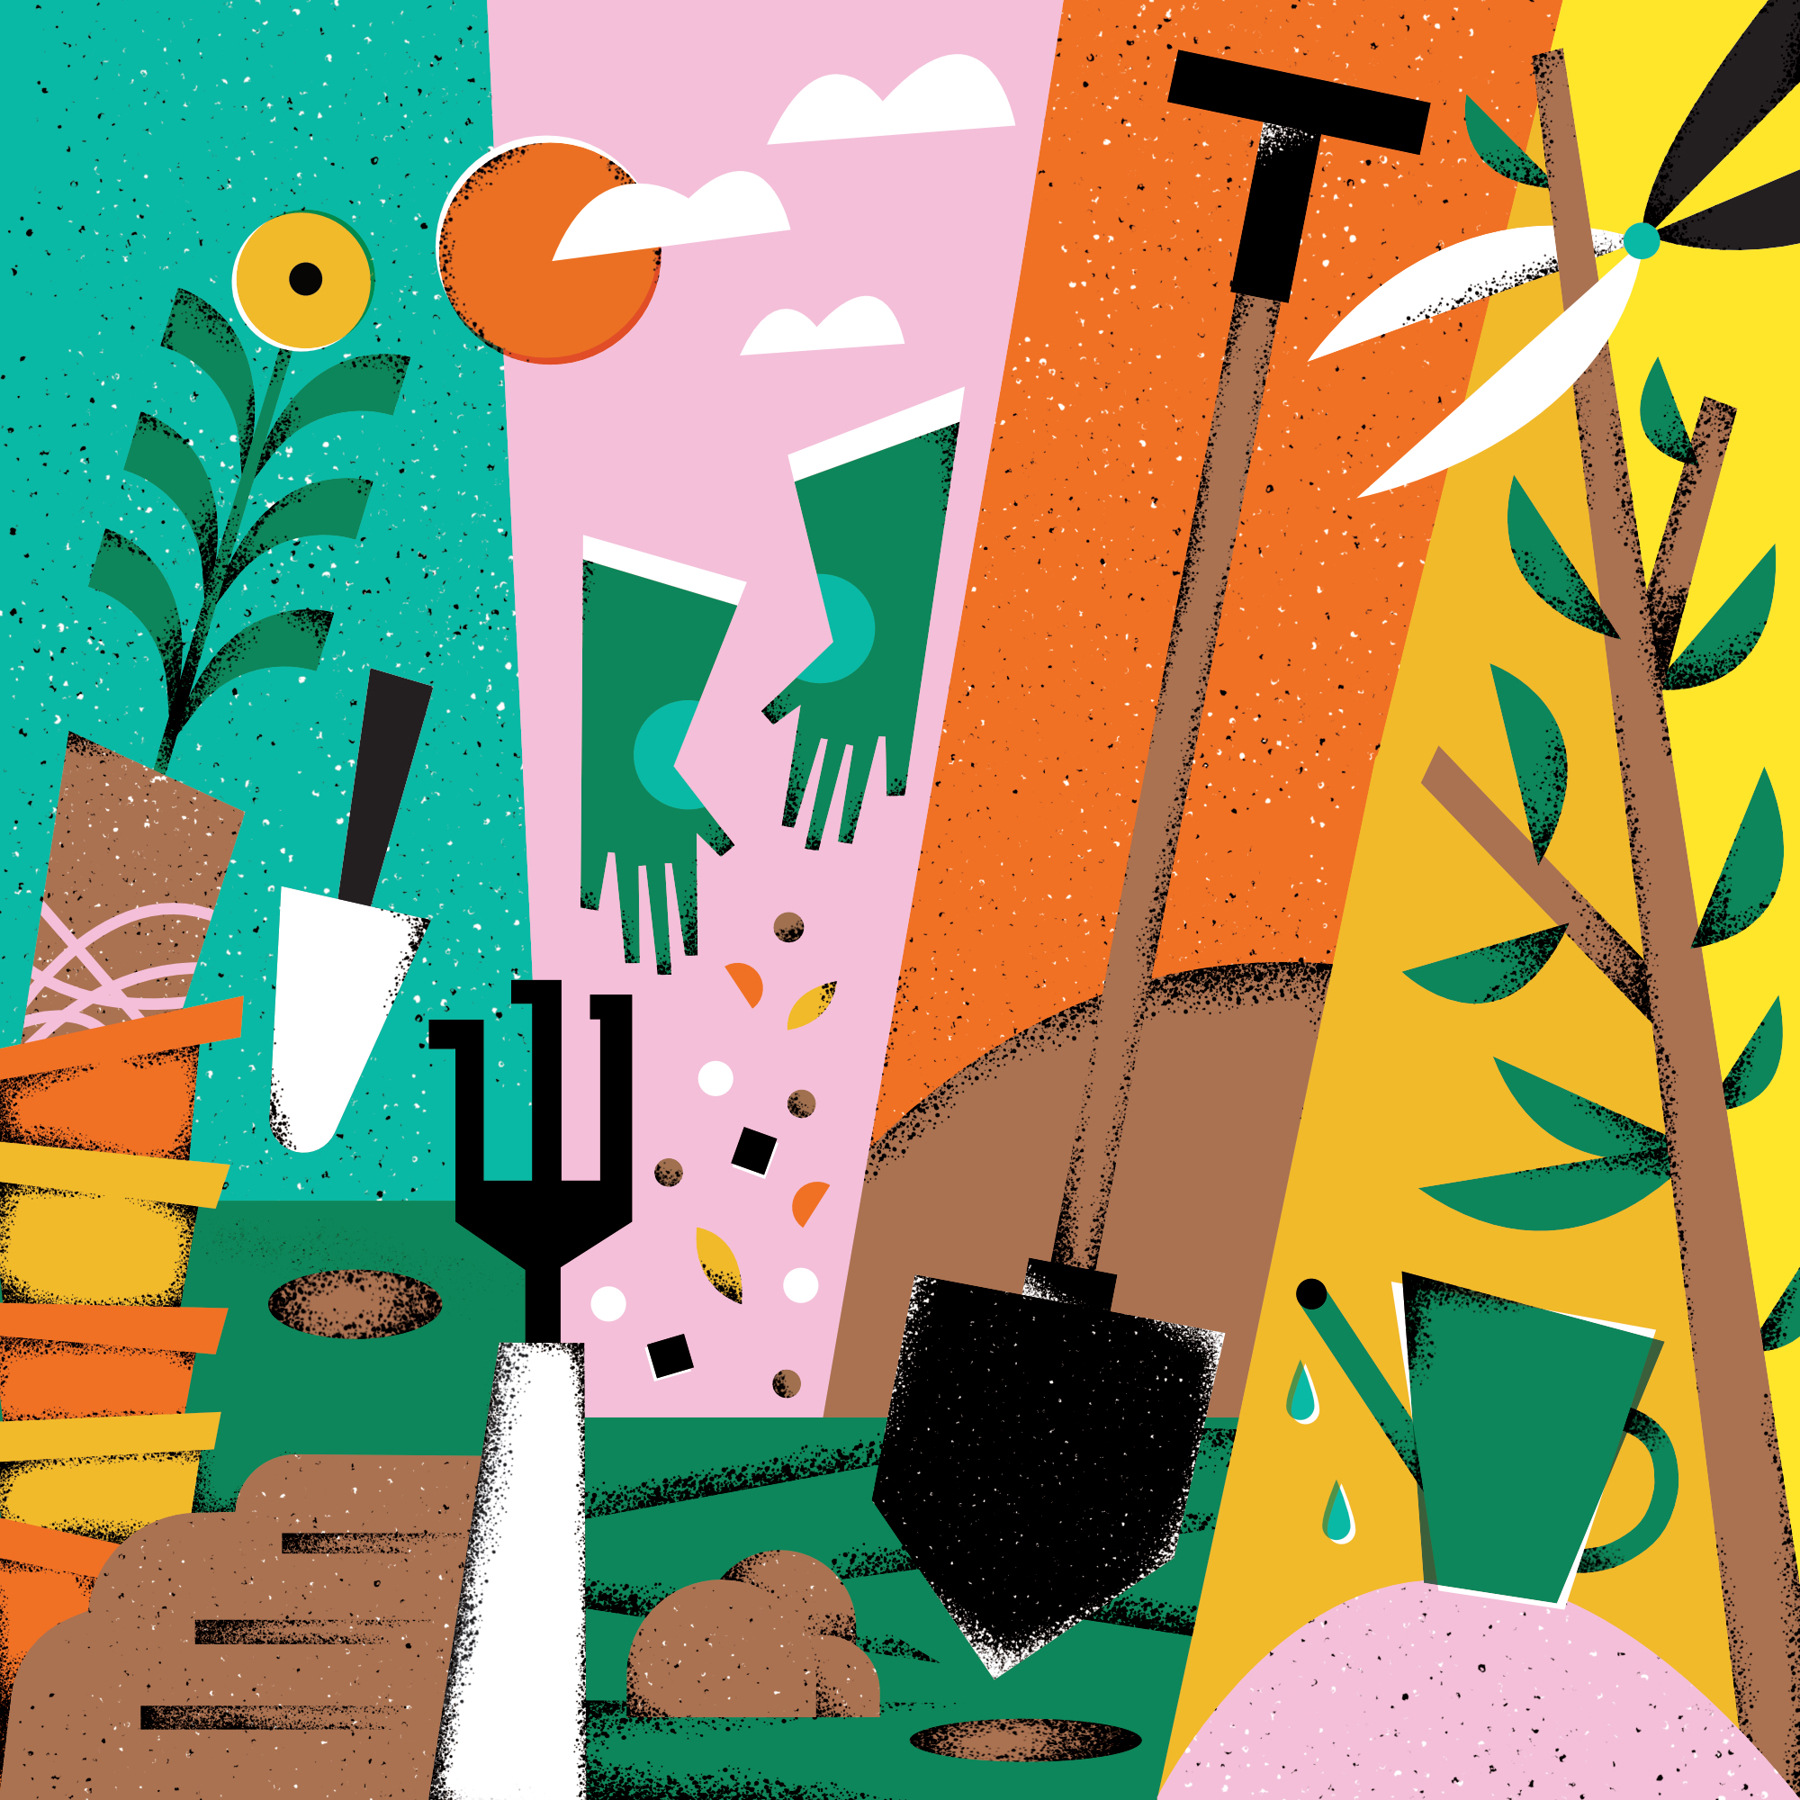 An illustration of various gardening tools, including spades, forks, shovels and watering cans.